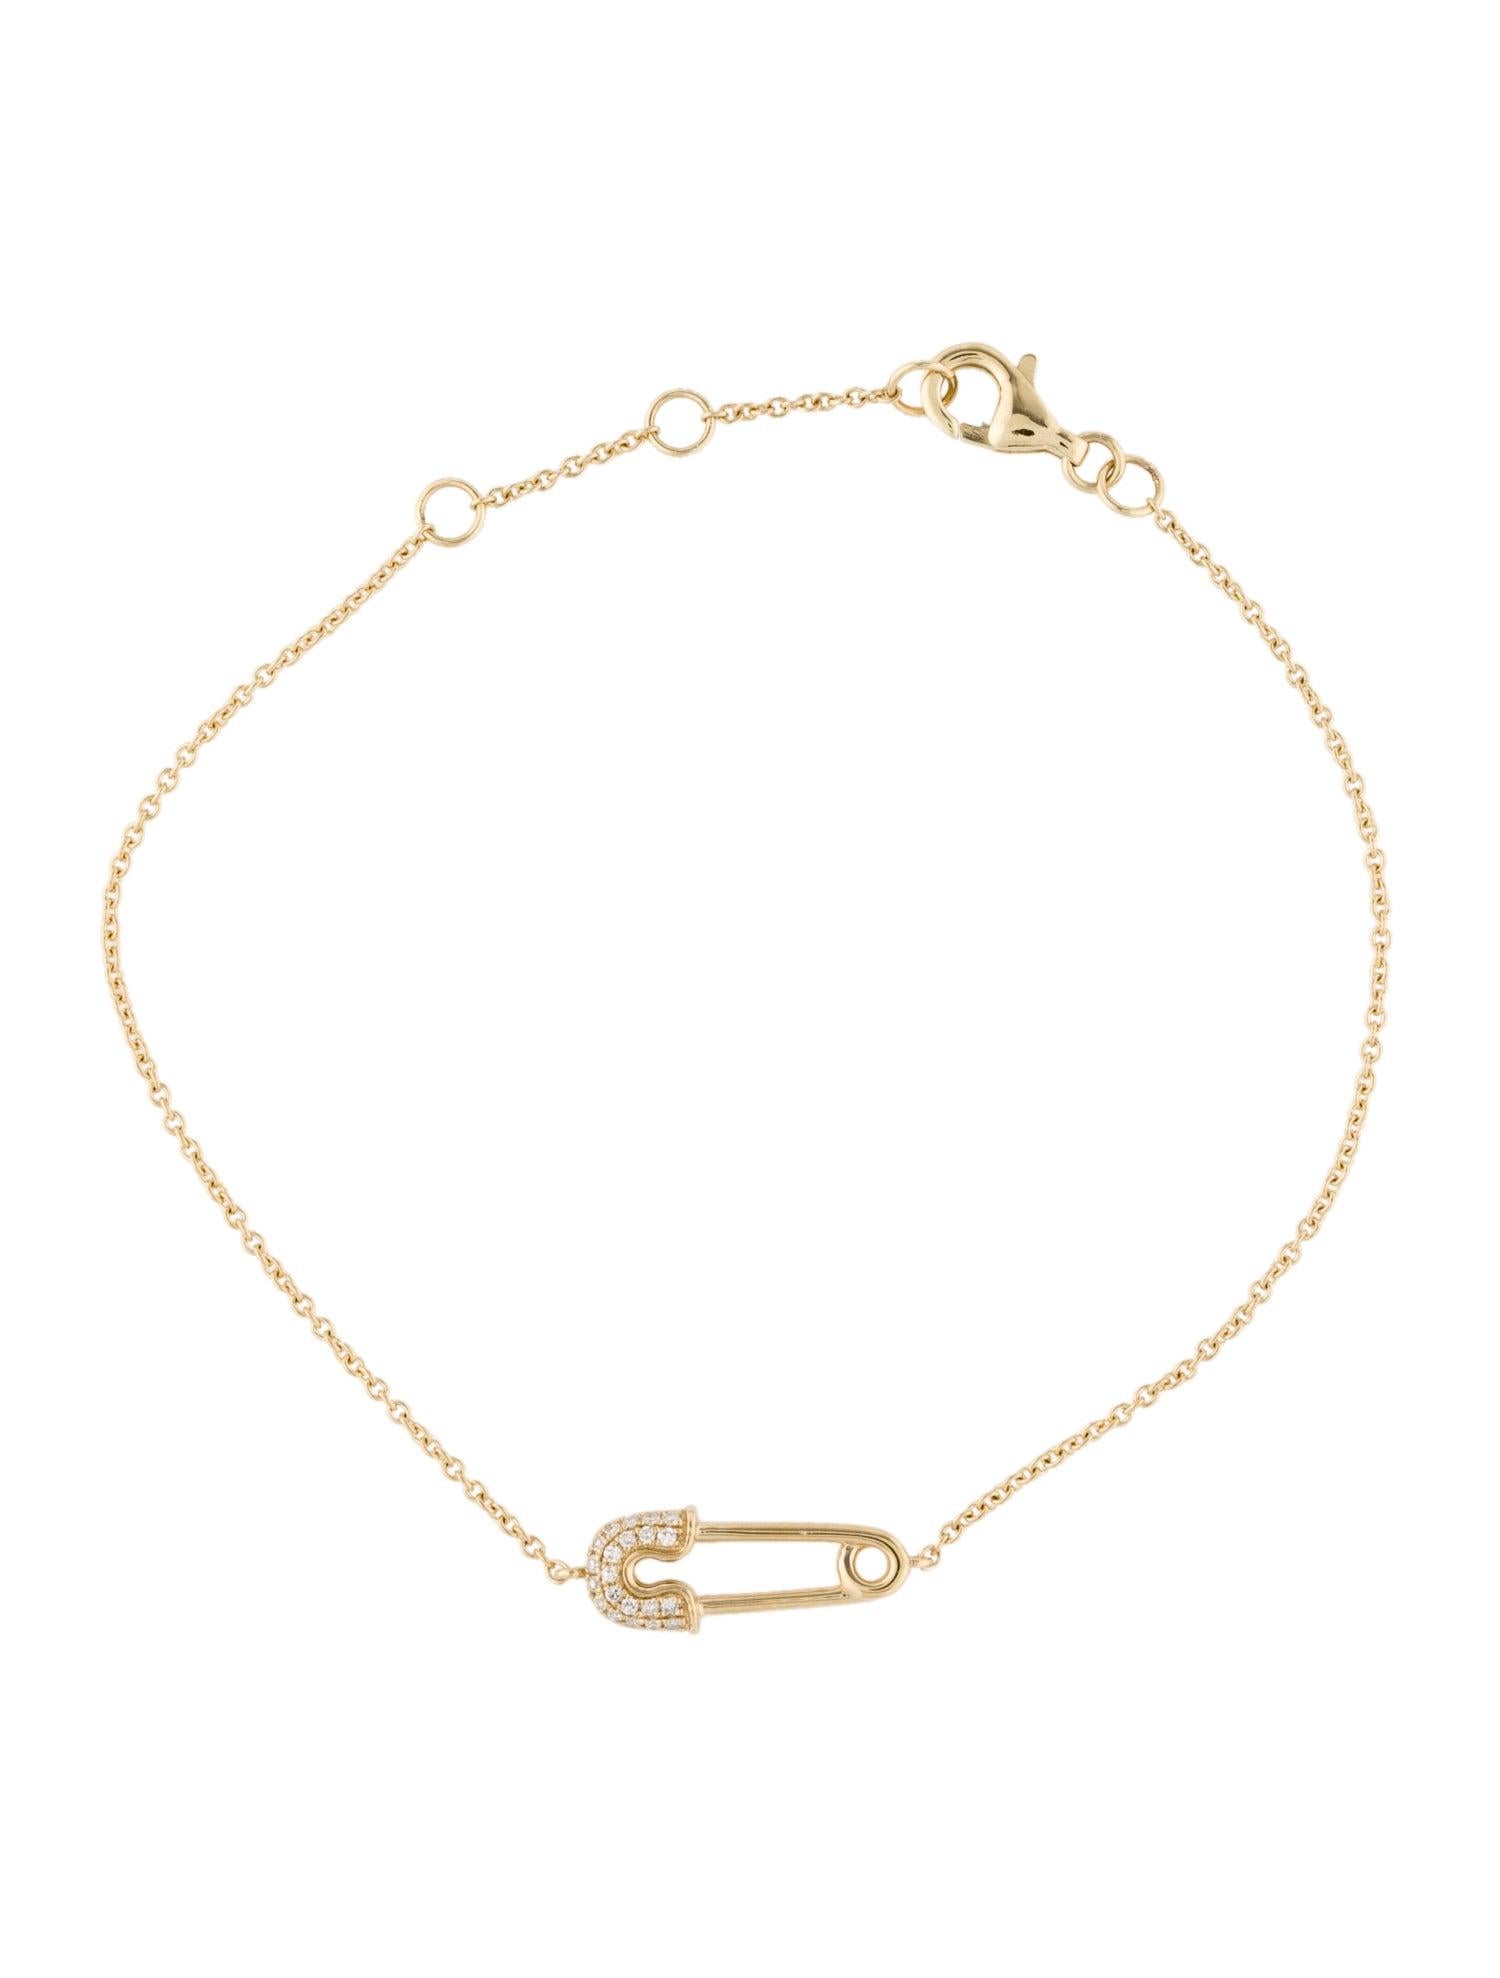 This Dainty Safety pin Bracelet is crafted of 14K yellow Gold and features 0.07 carats of natural round white Diamonds. Bracelet length is adjustable 6.75